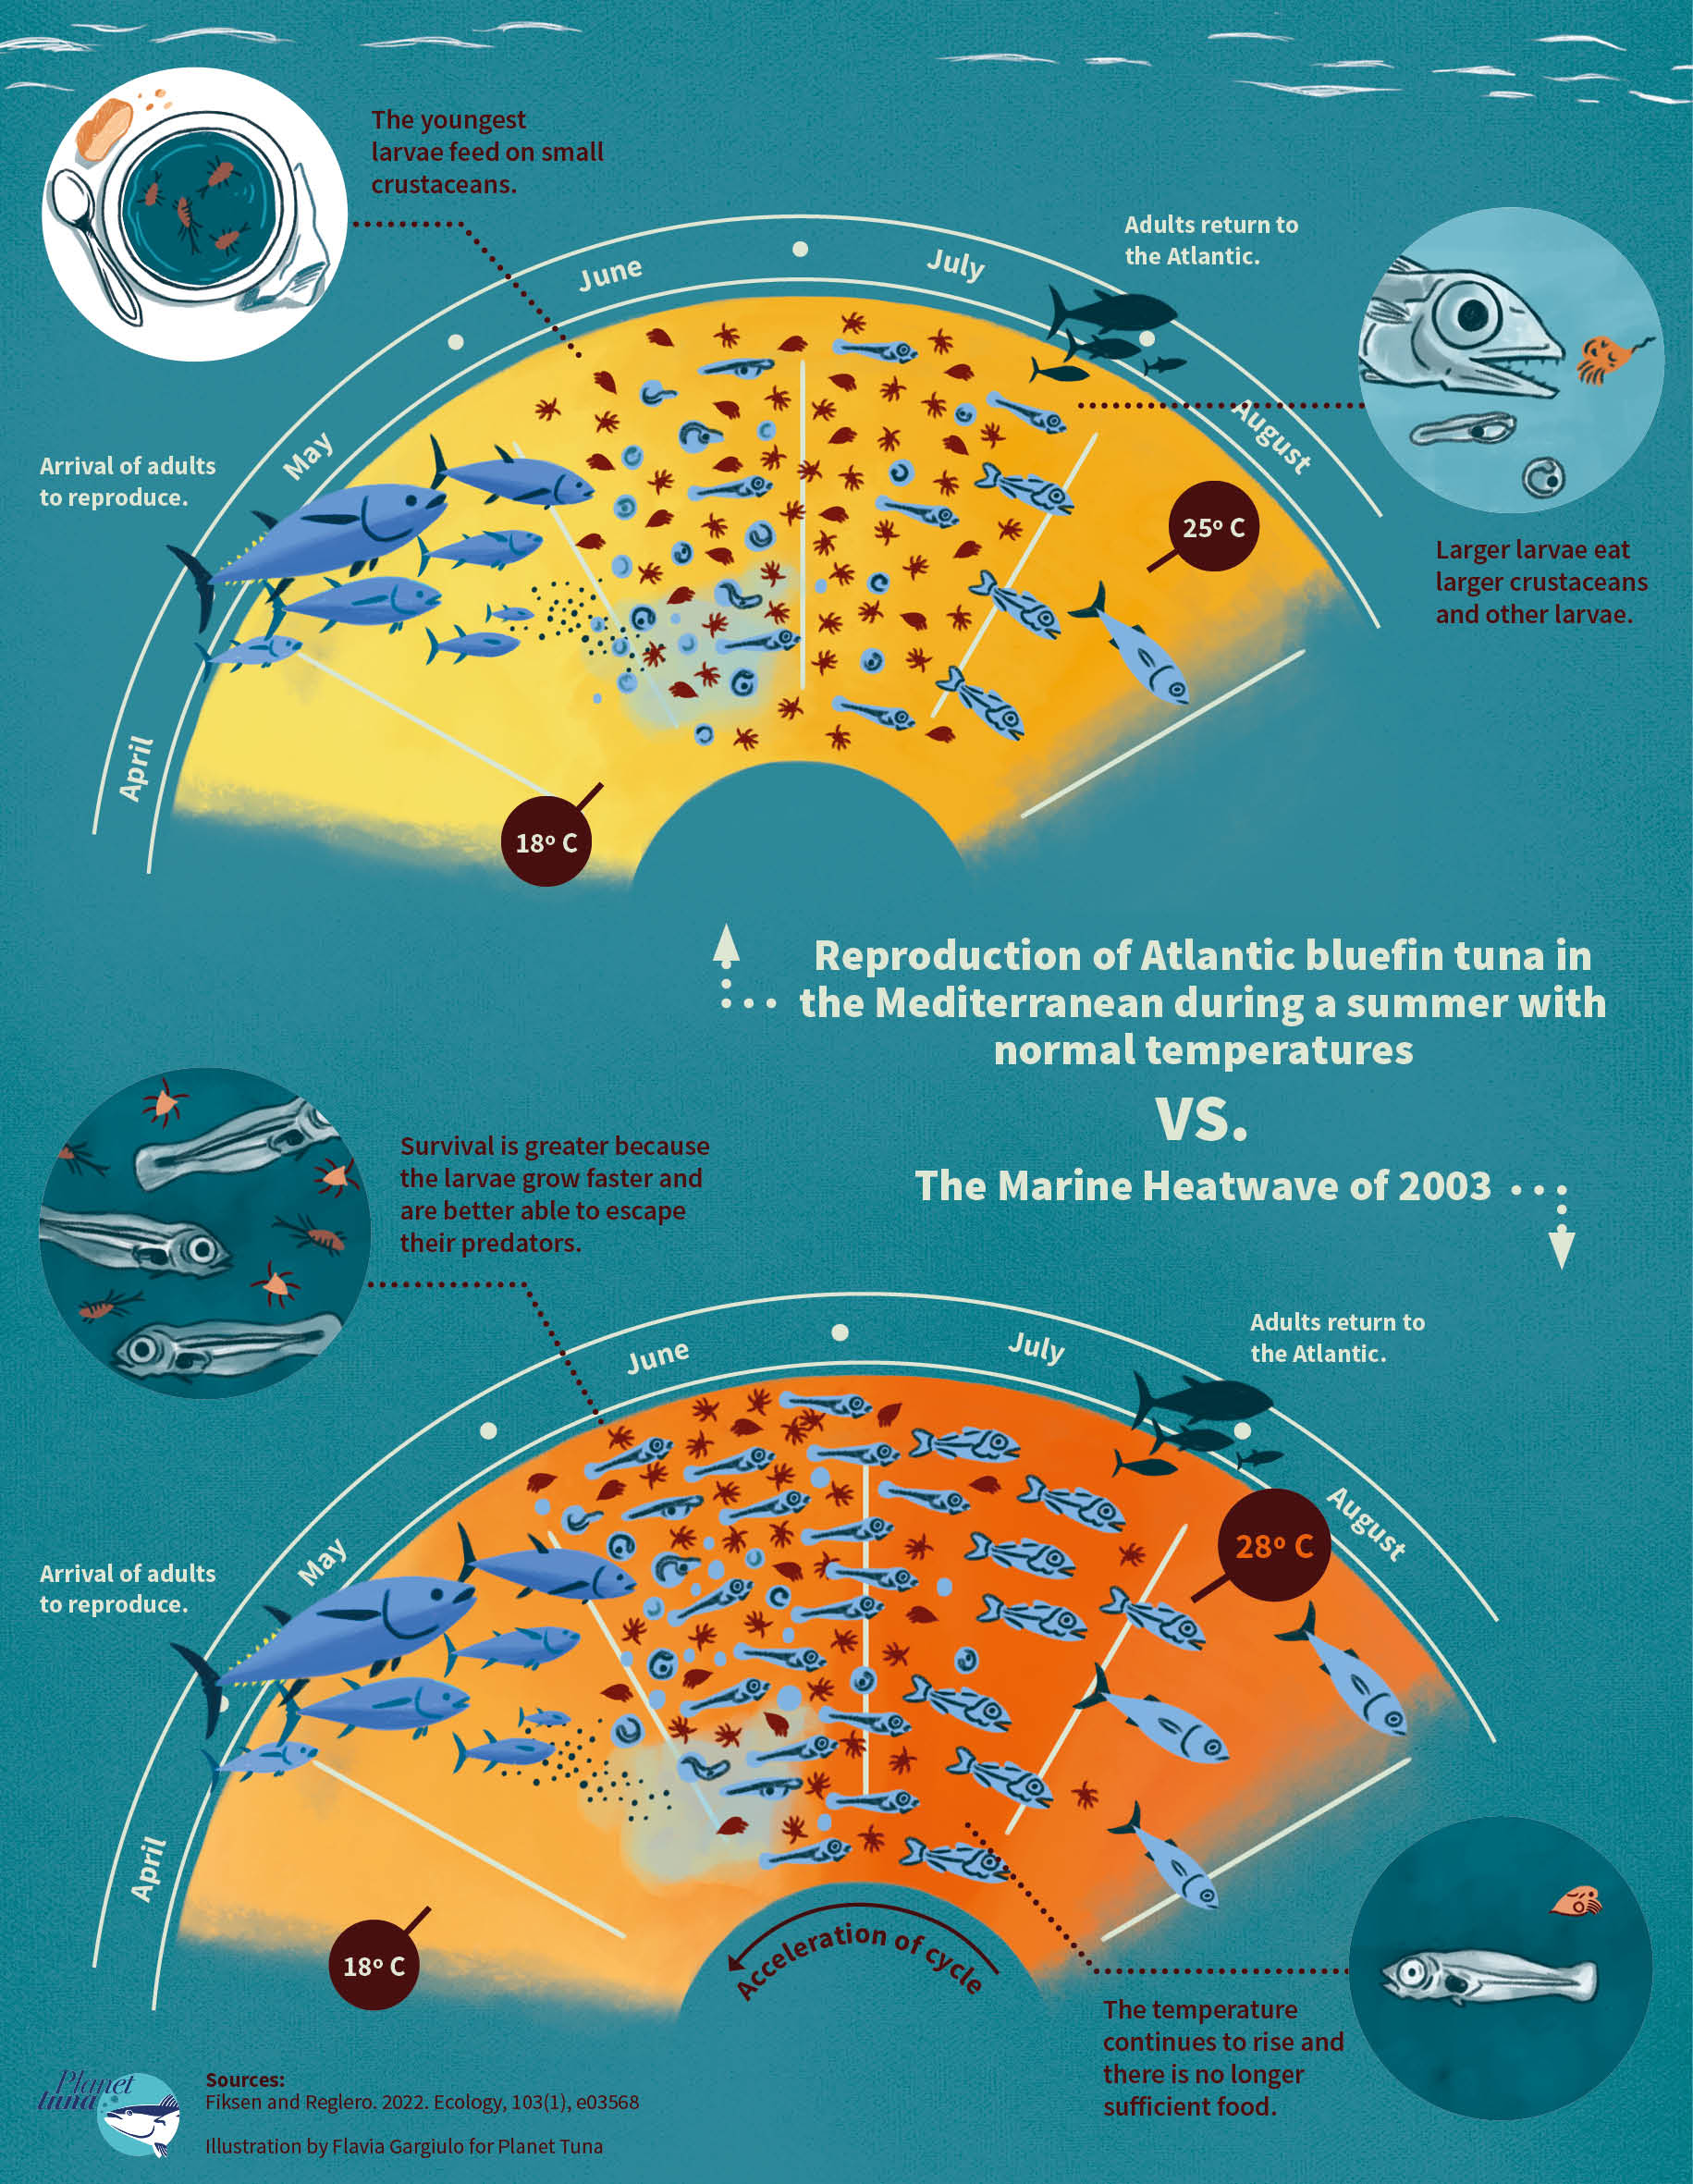 The illustration compares the breeding cycle of Atlantic bluefin tuna in a summer with normal temperatures with the breeding cycle in 2003. The image shows how the marine heatwave of 2003 accelerated the breeding cycle of Atlantic bluefin tuna.